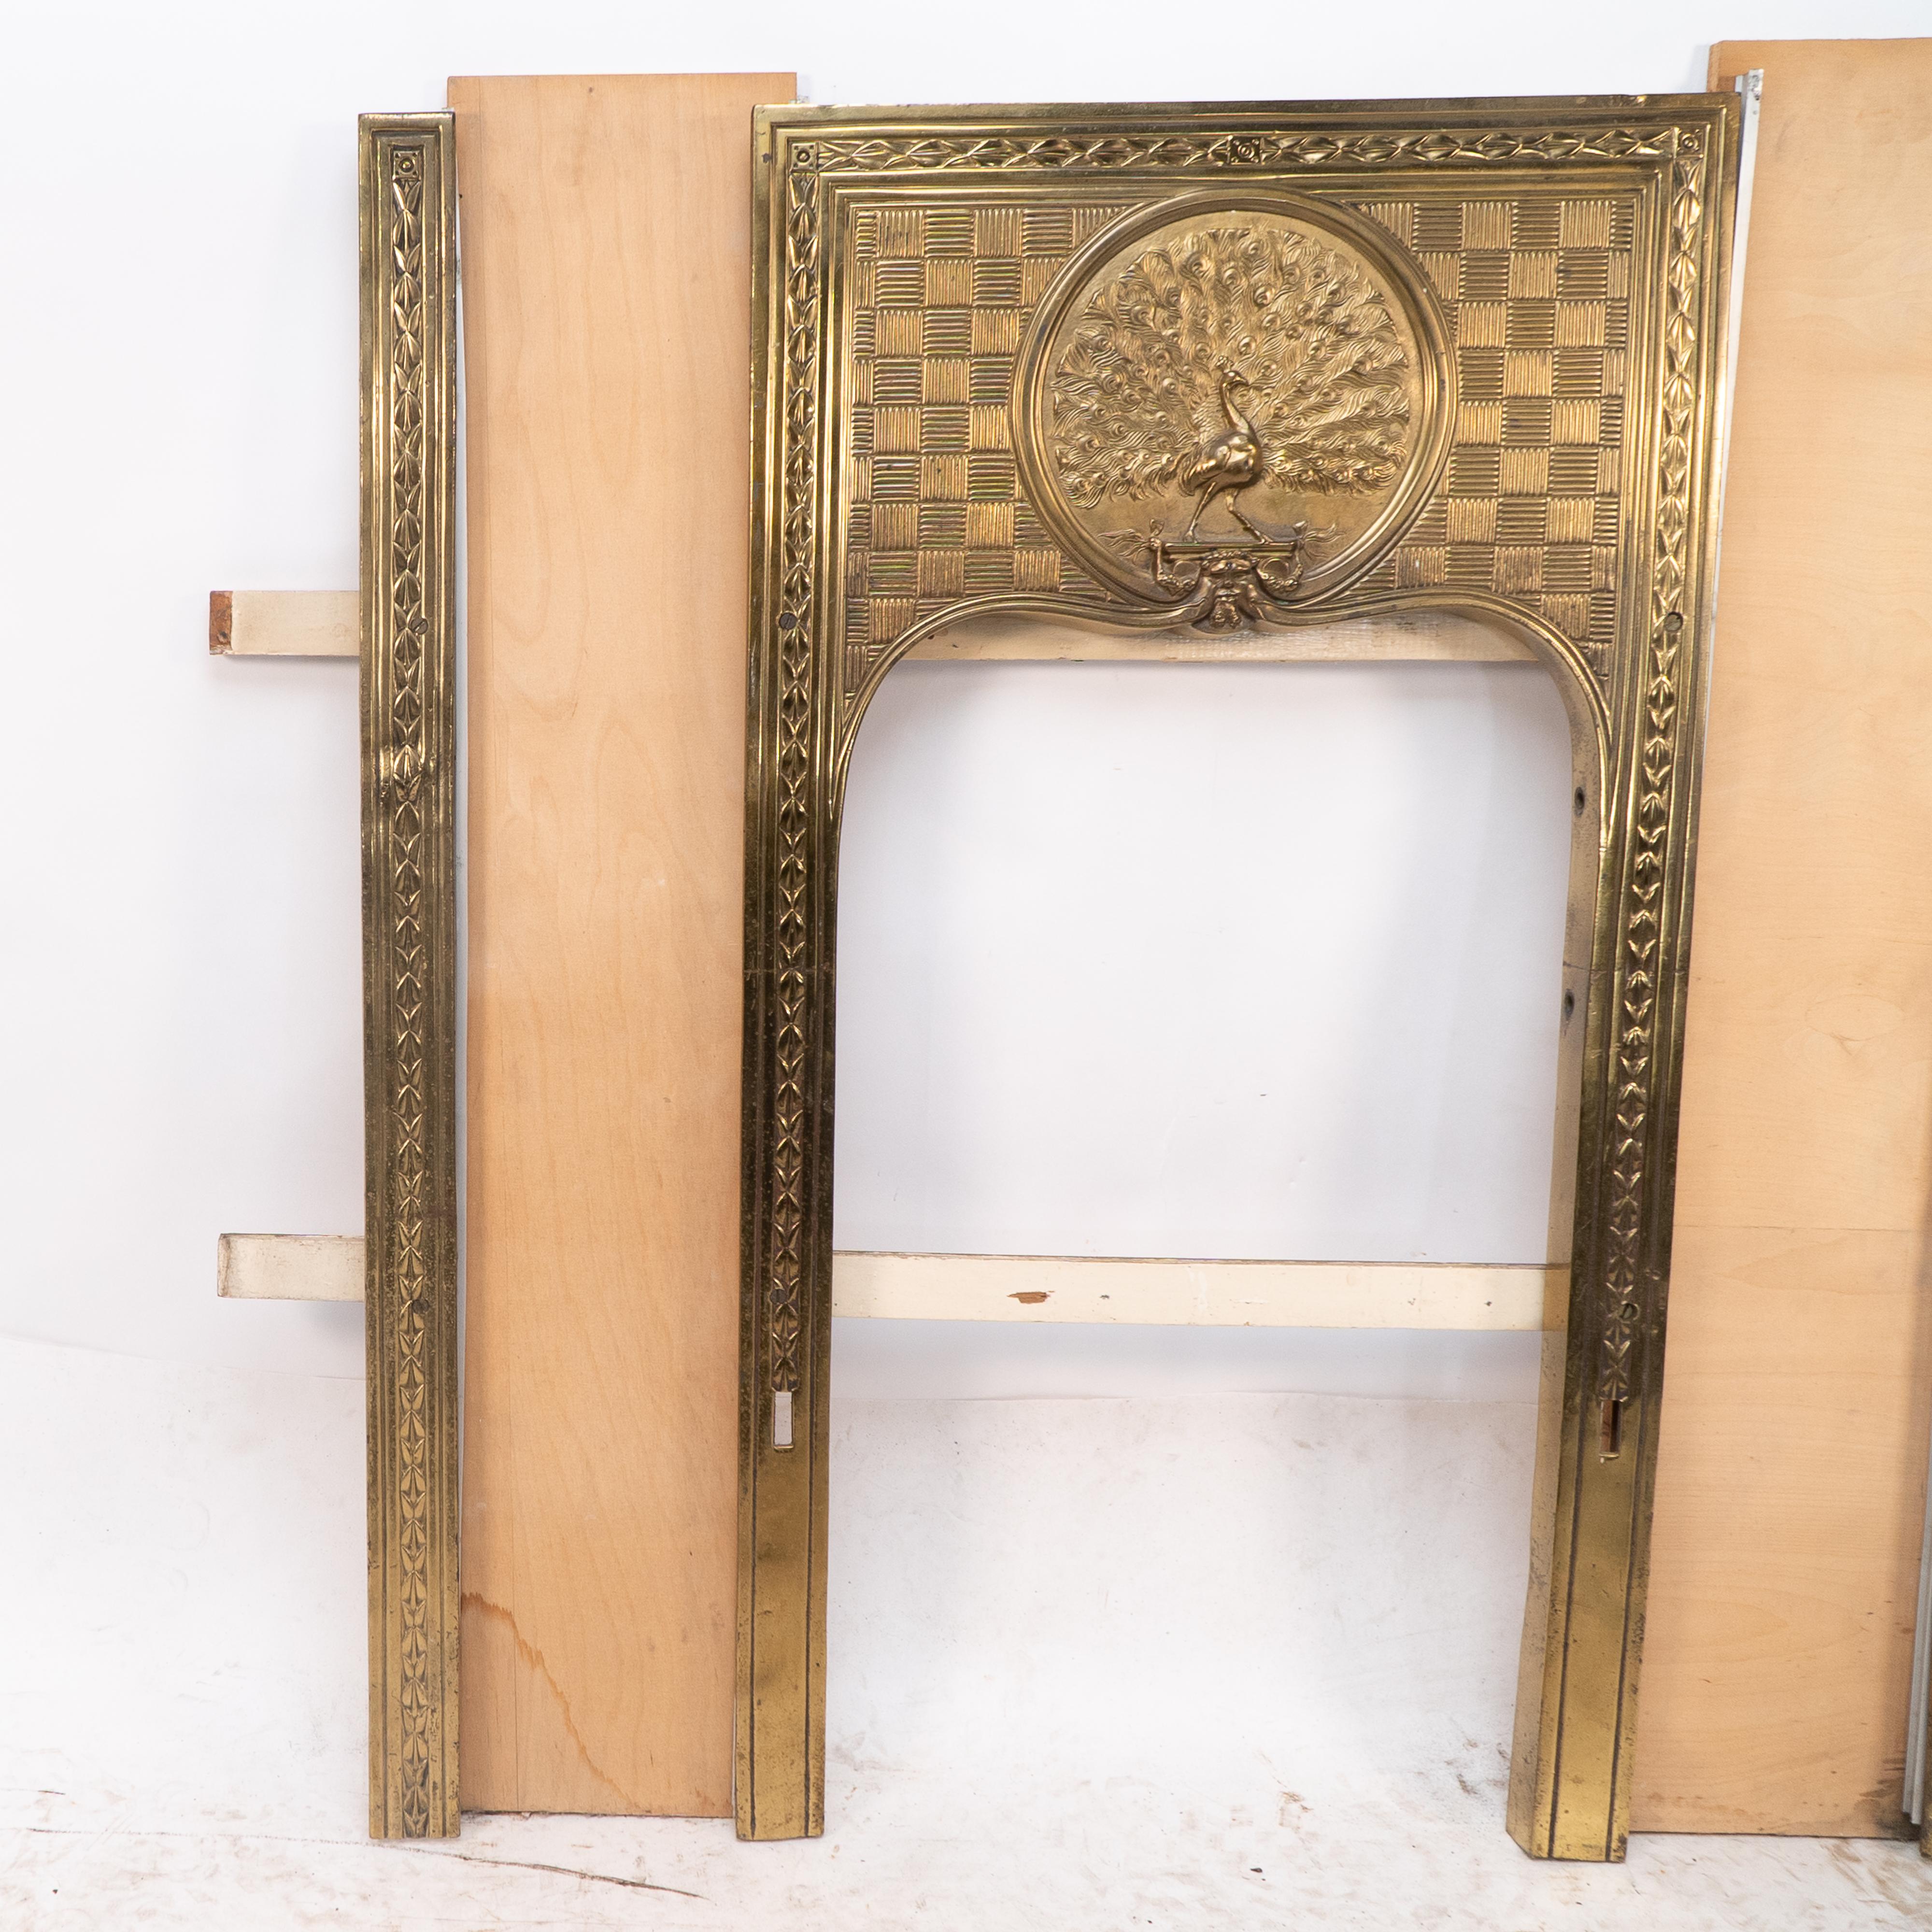 Late 19th Century T. Elsley attri. Aesthetic Movement brass fire insert w. upper central peacock For Sale